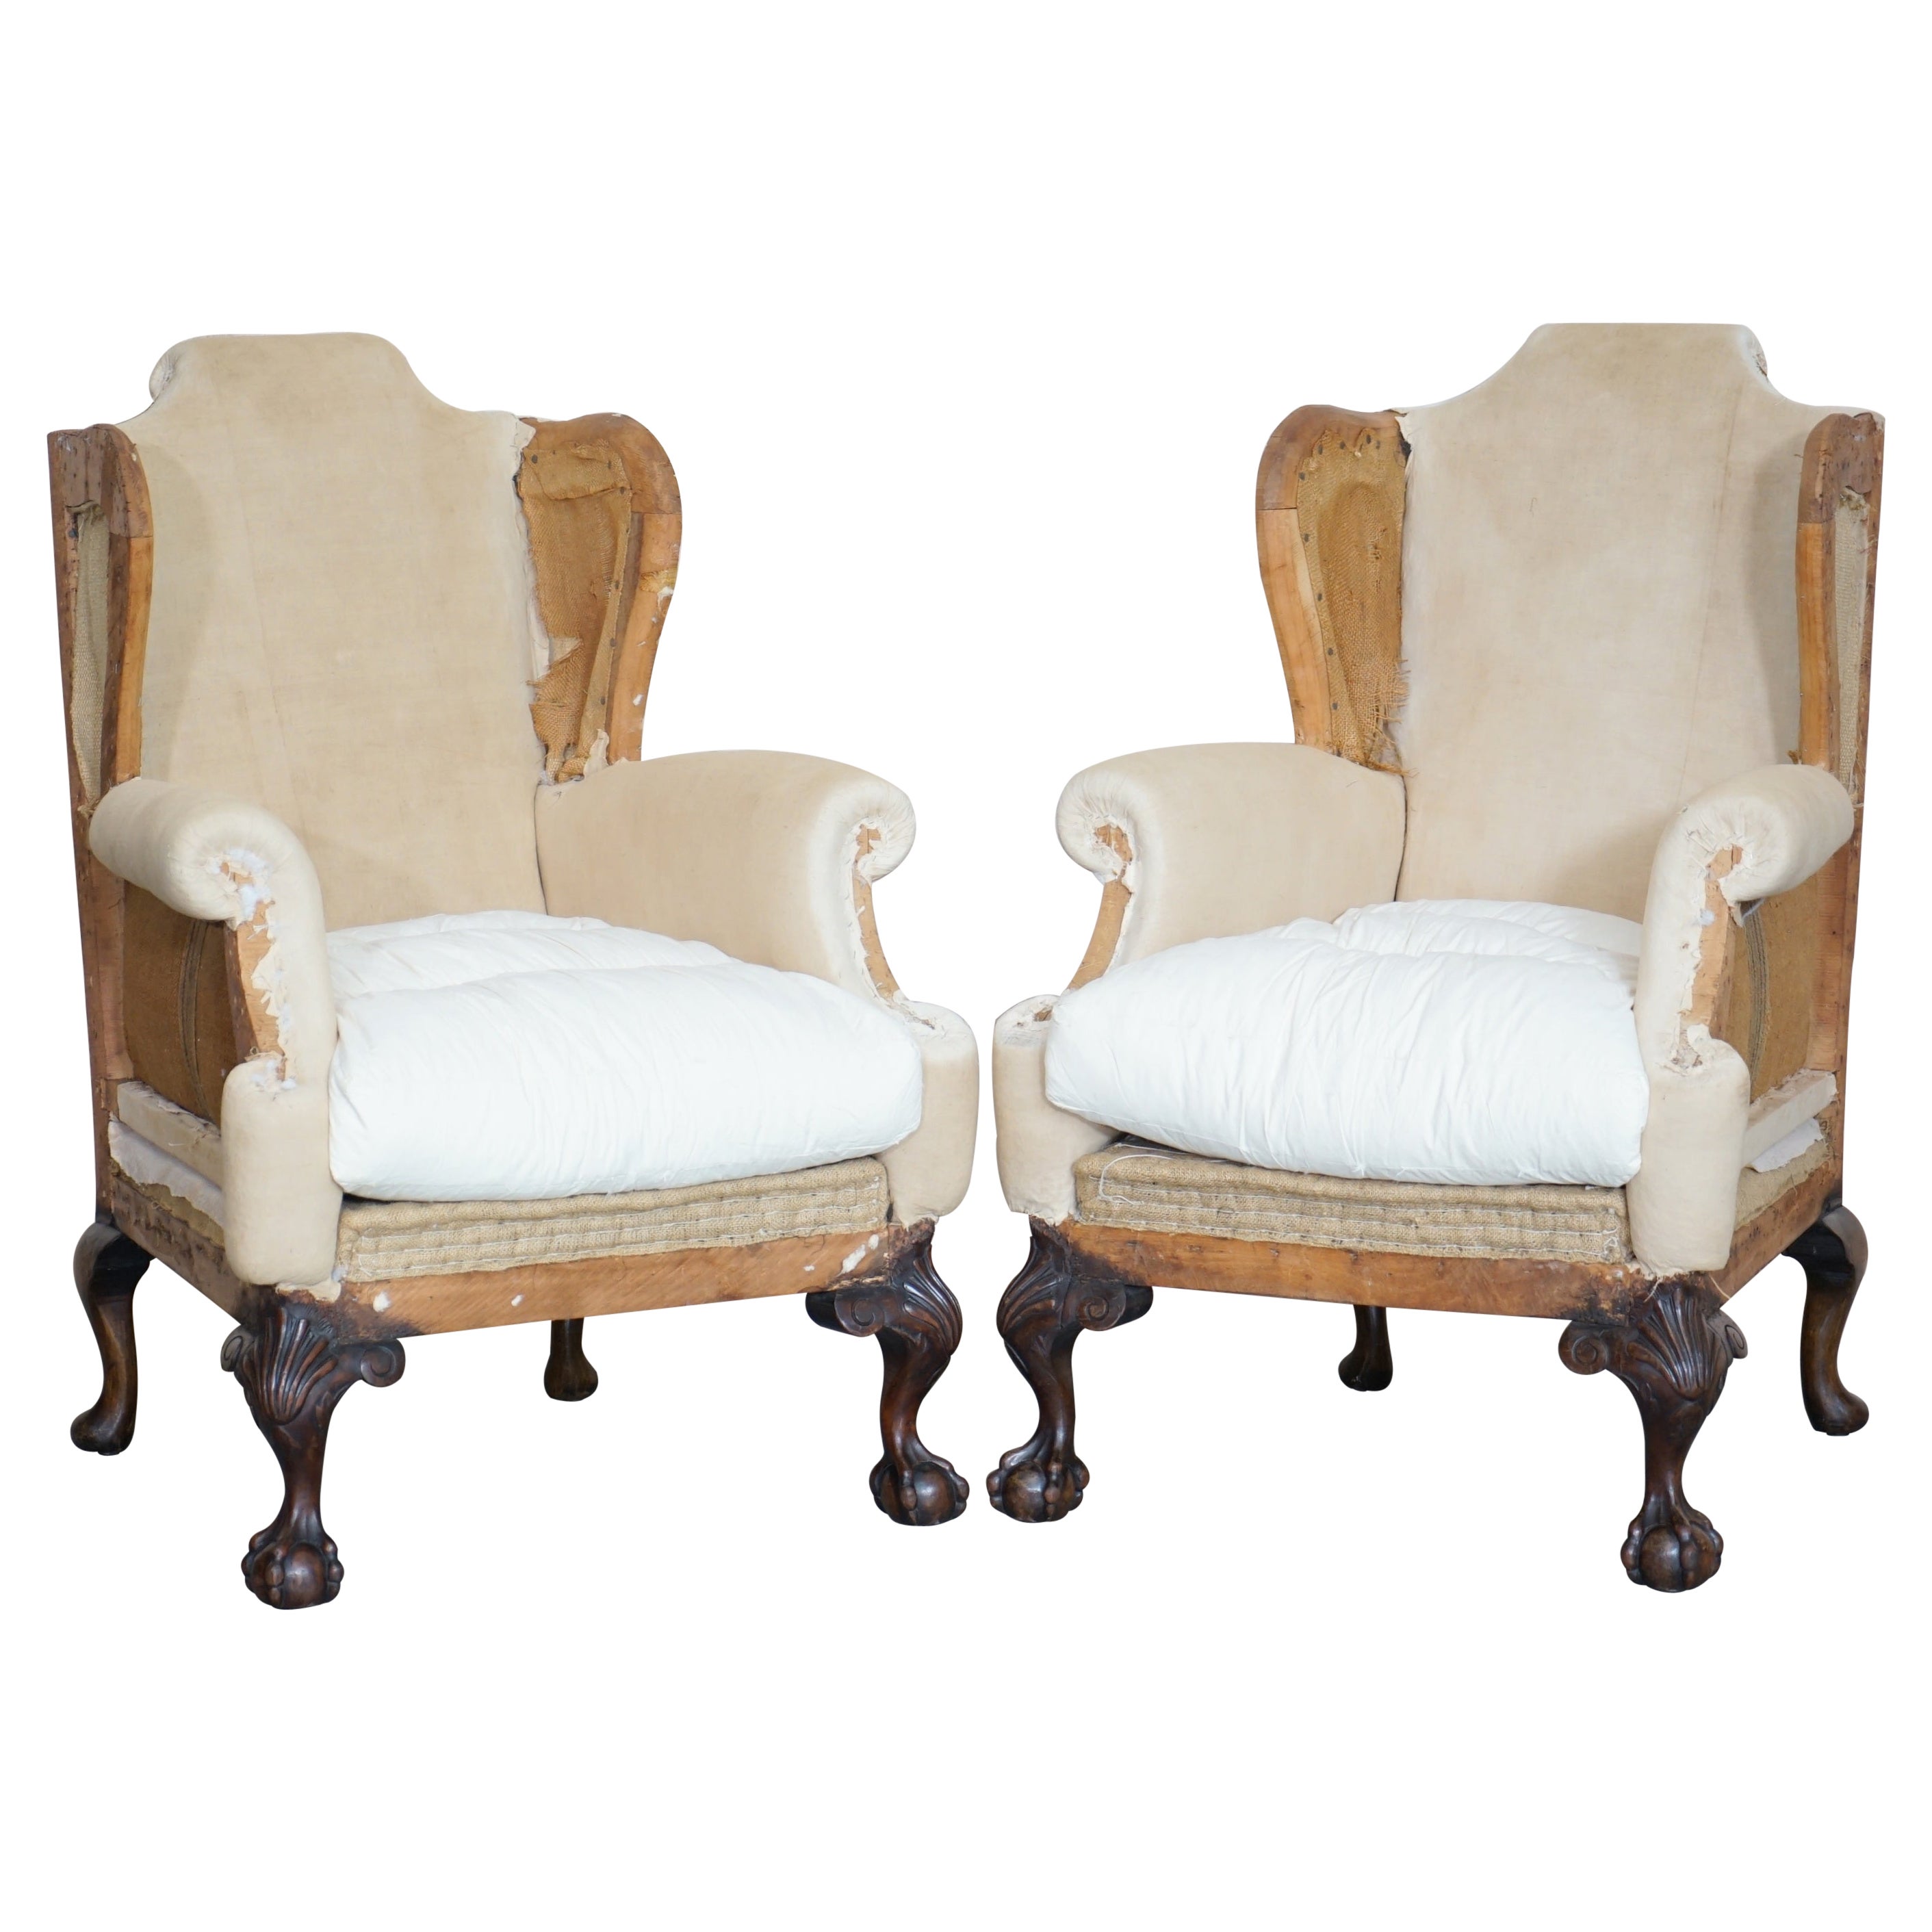 Pair of Antique Victorian Deconstructed Wingback Armchairs with Claw & Ball Feet